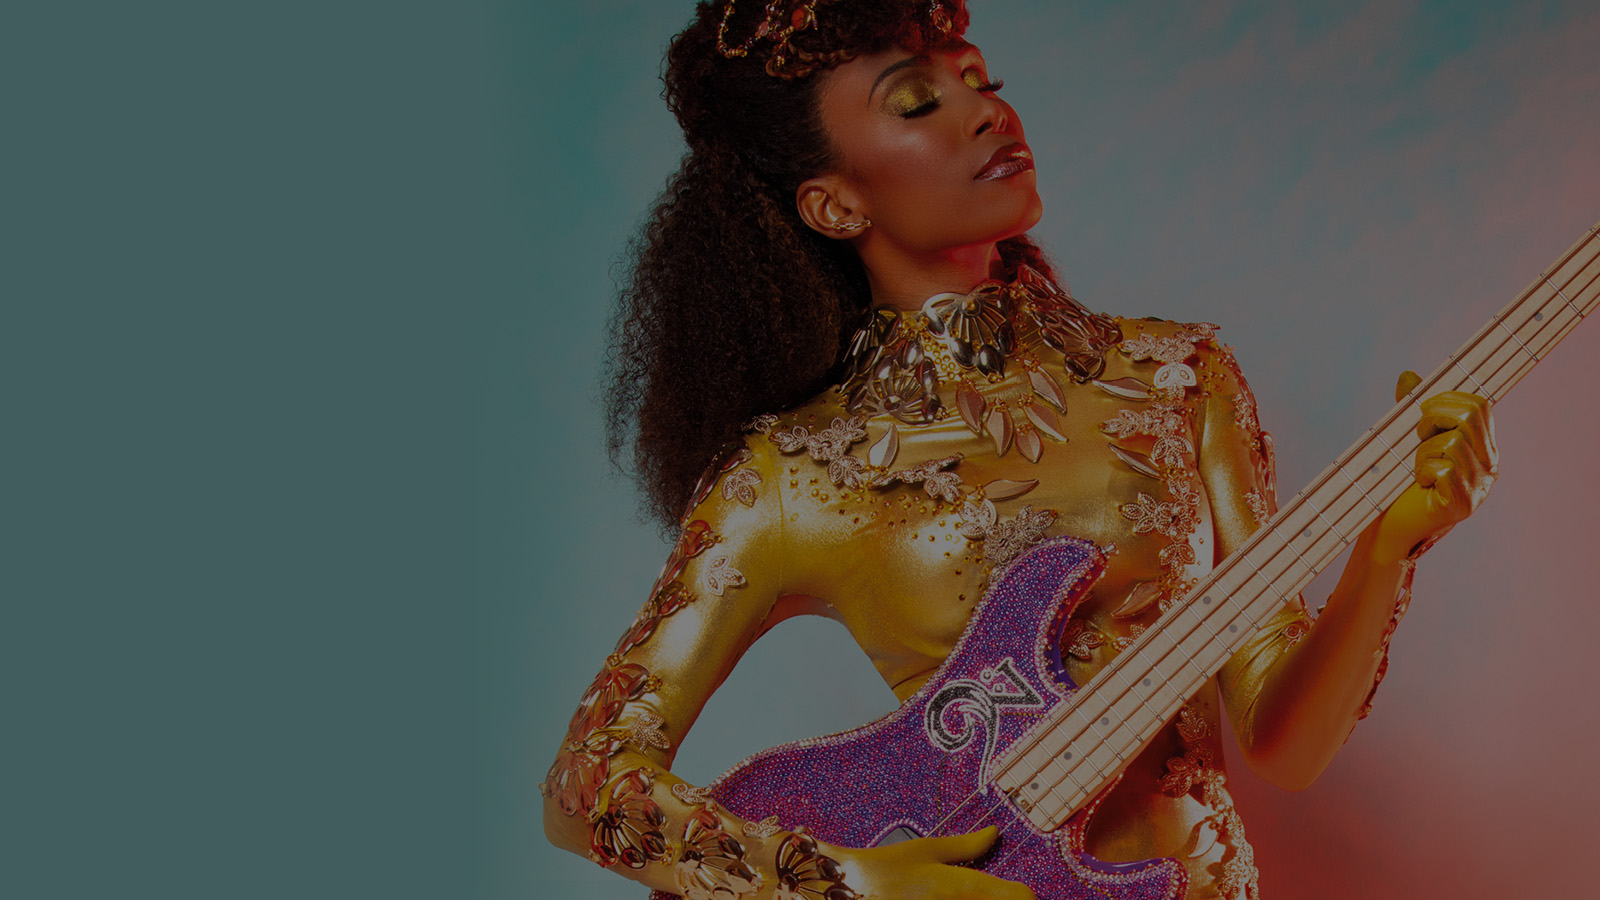 Bassist and vocalist Nik West wearing a glorious bejewelled gold headpiece and outfit playing the electric bass.